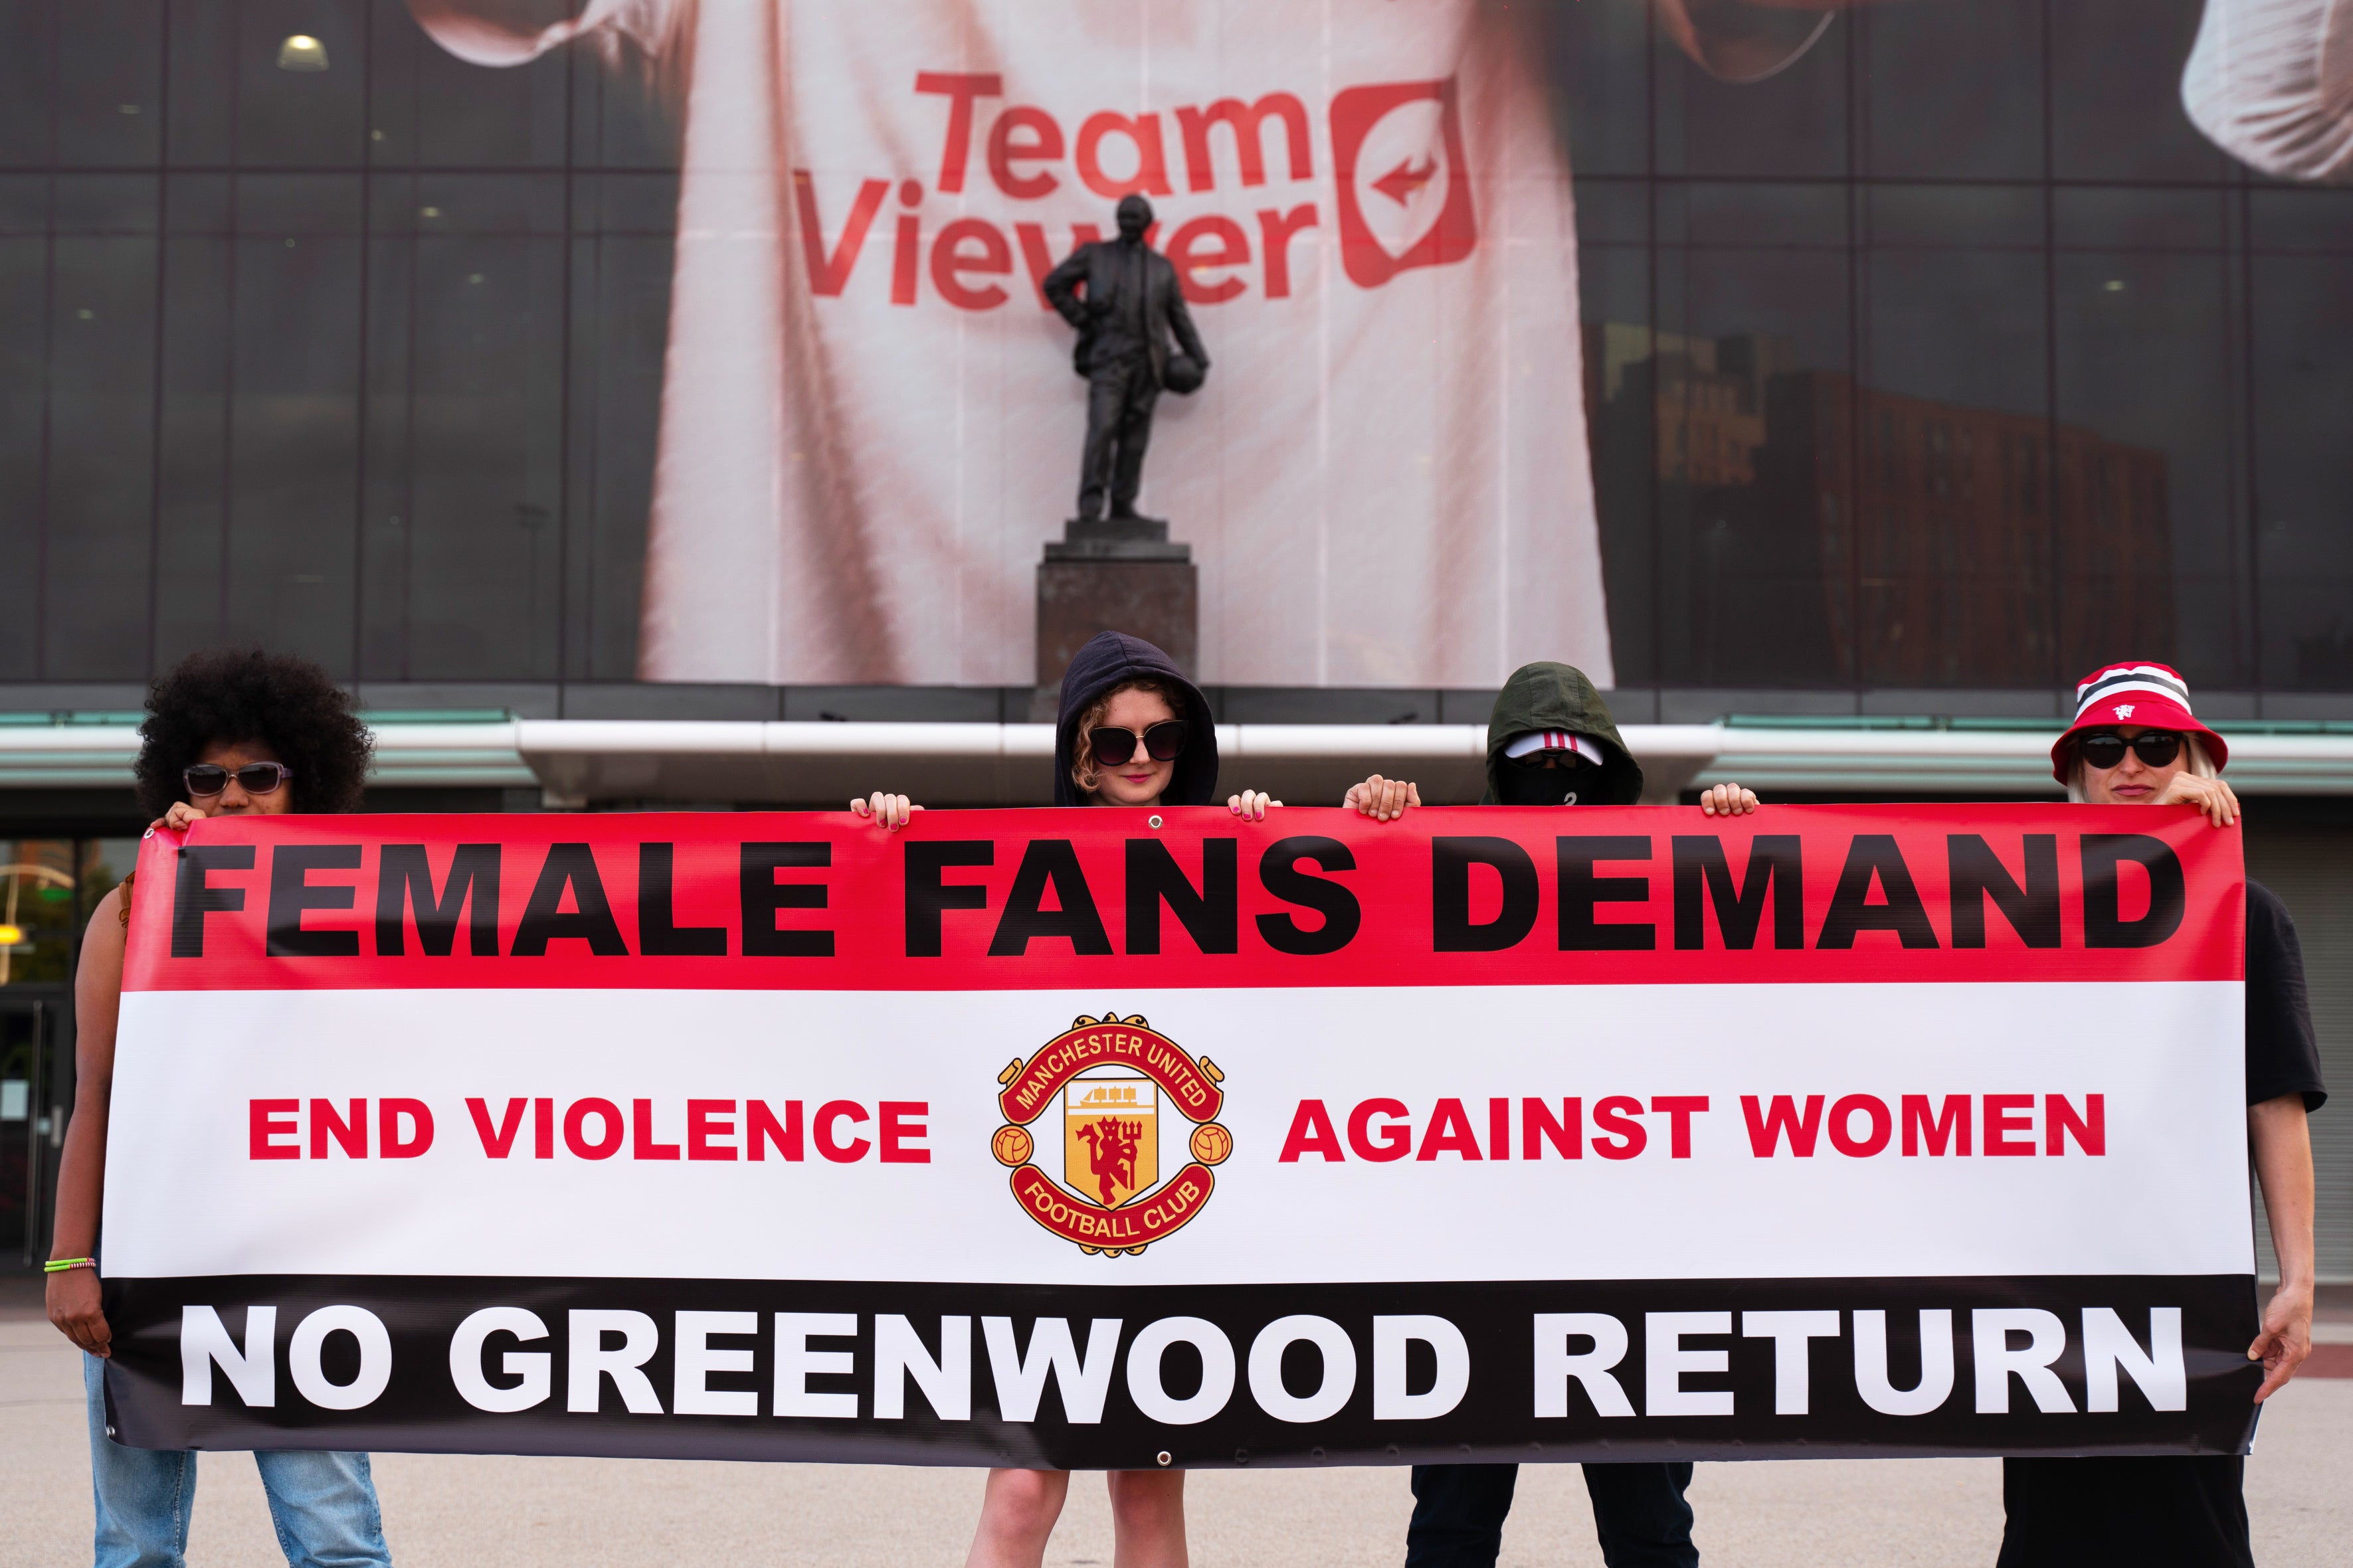 There were protests outside Old Trafford before their game against Wolves against Greenwood’s potential return